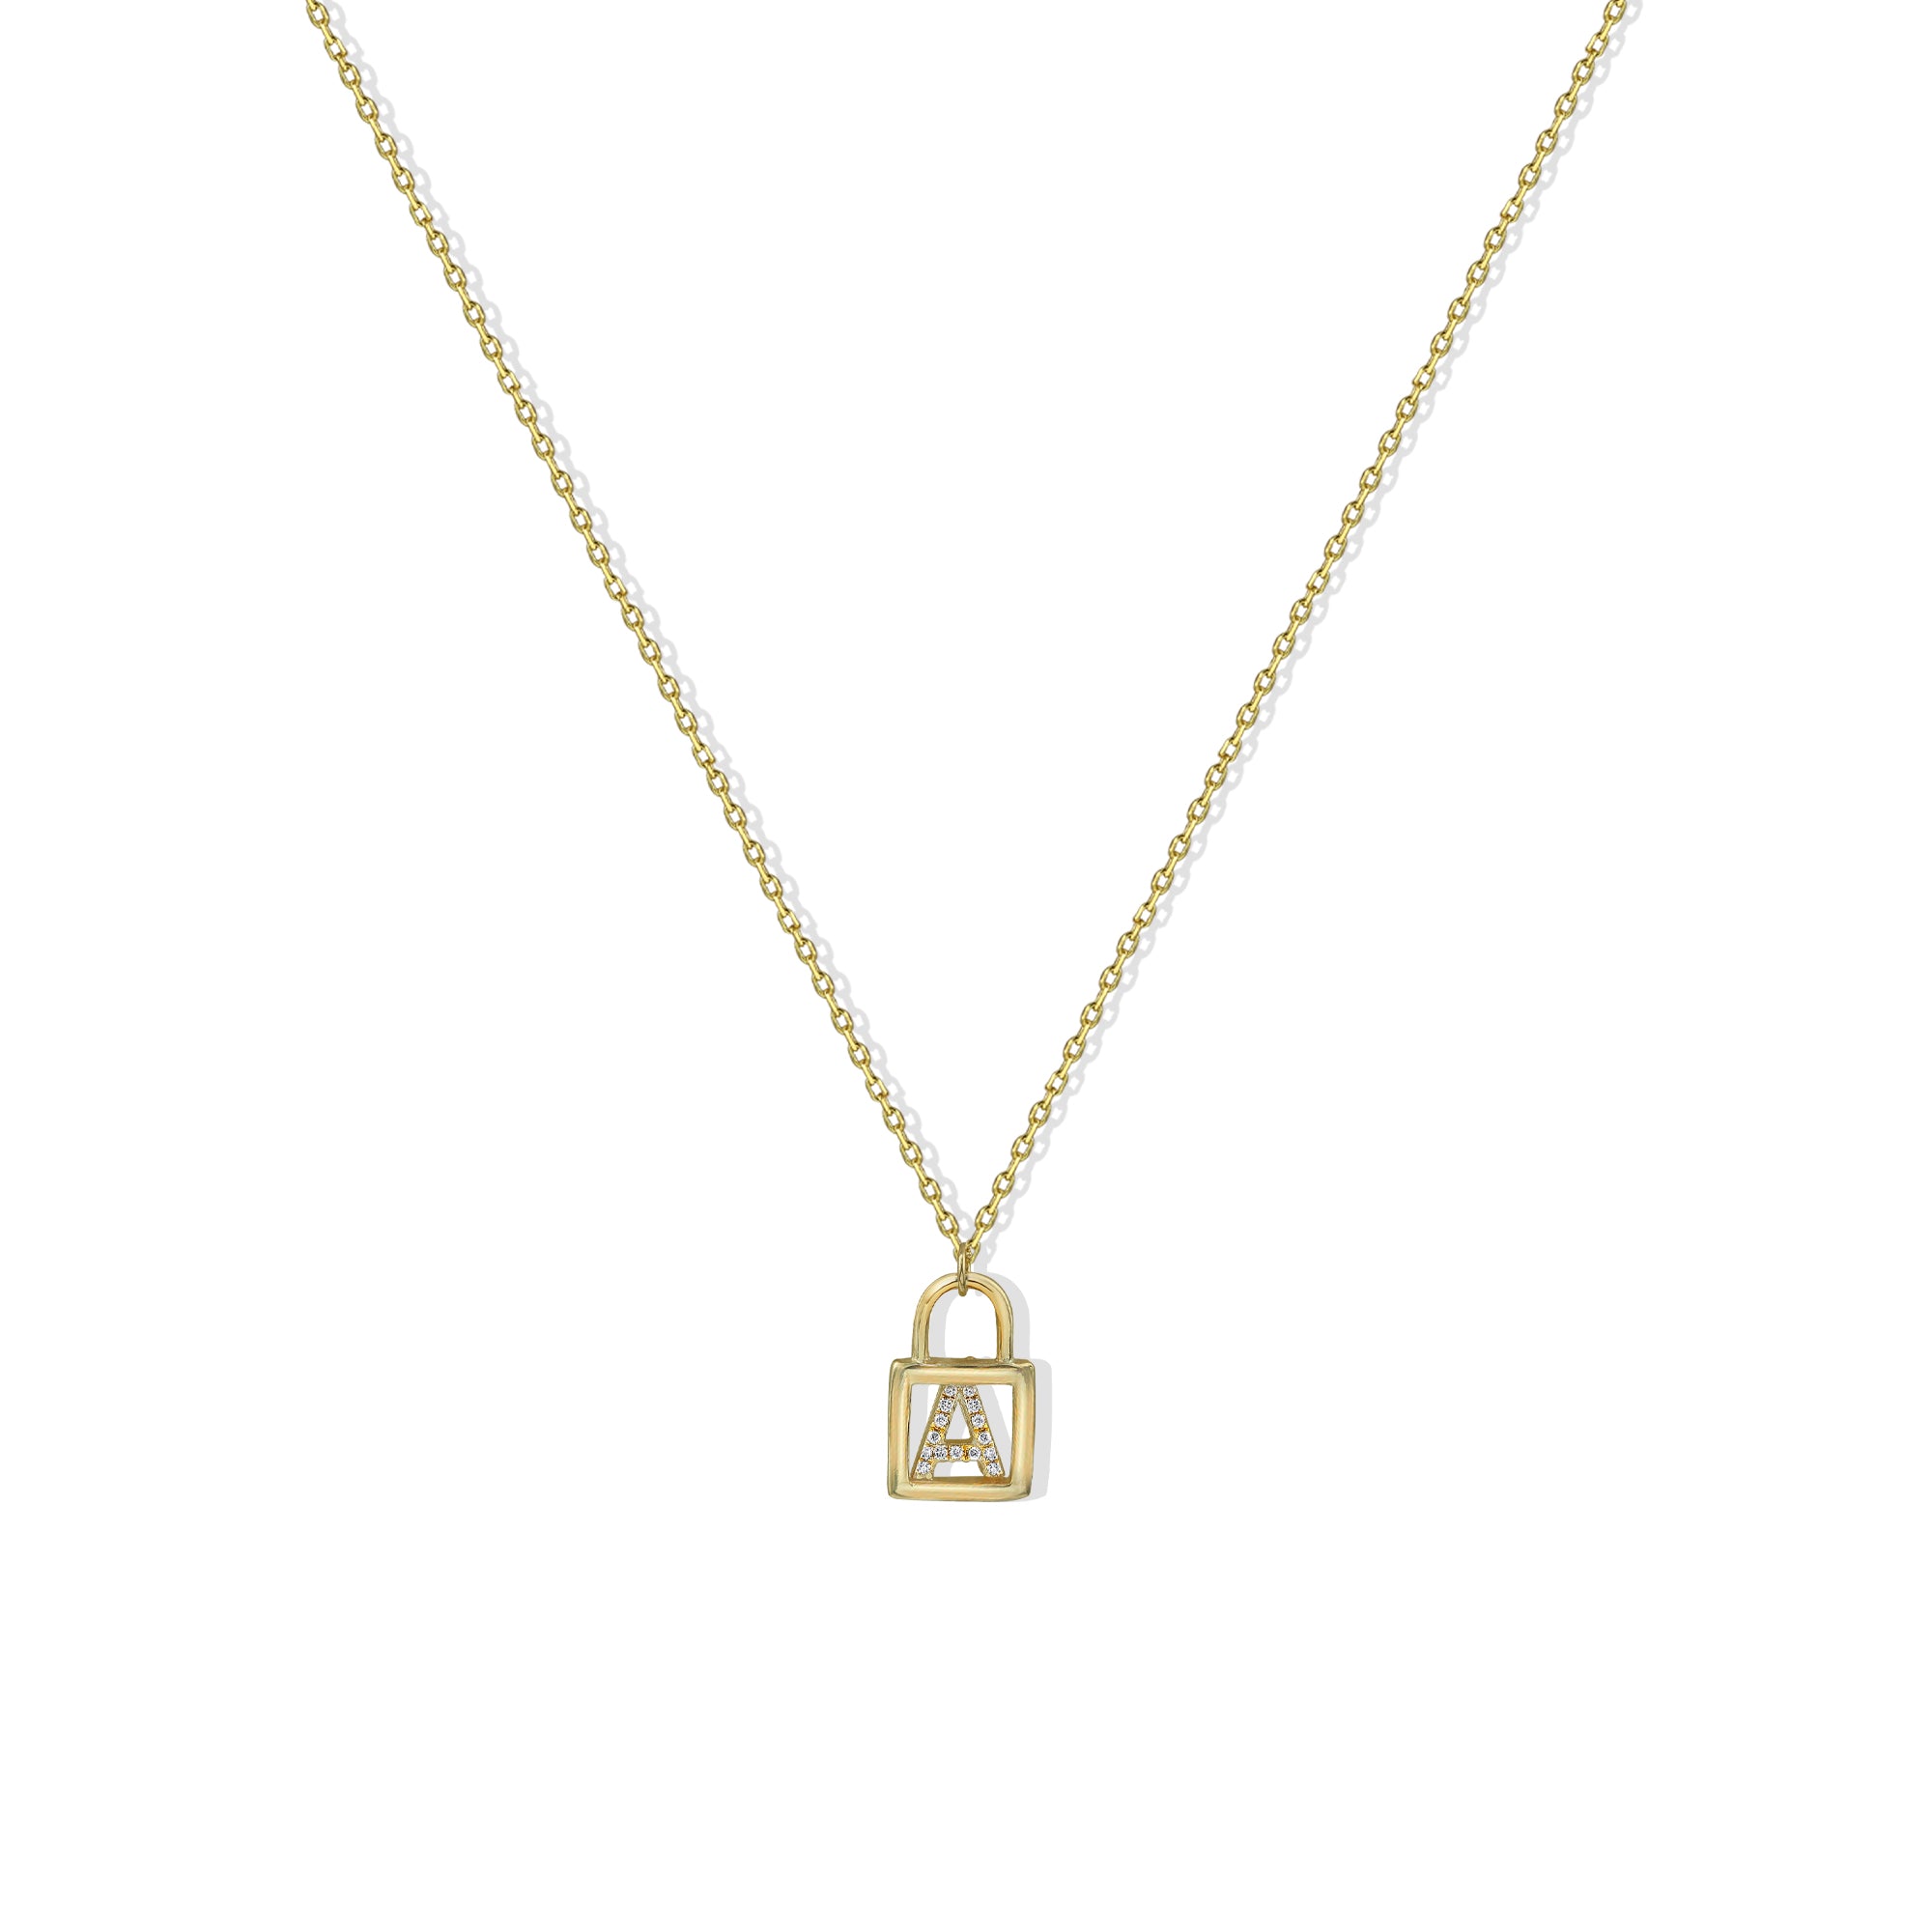 THE INITIAL LOCKET NECKLACE